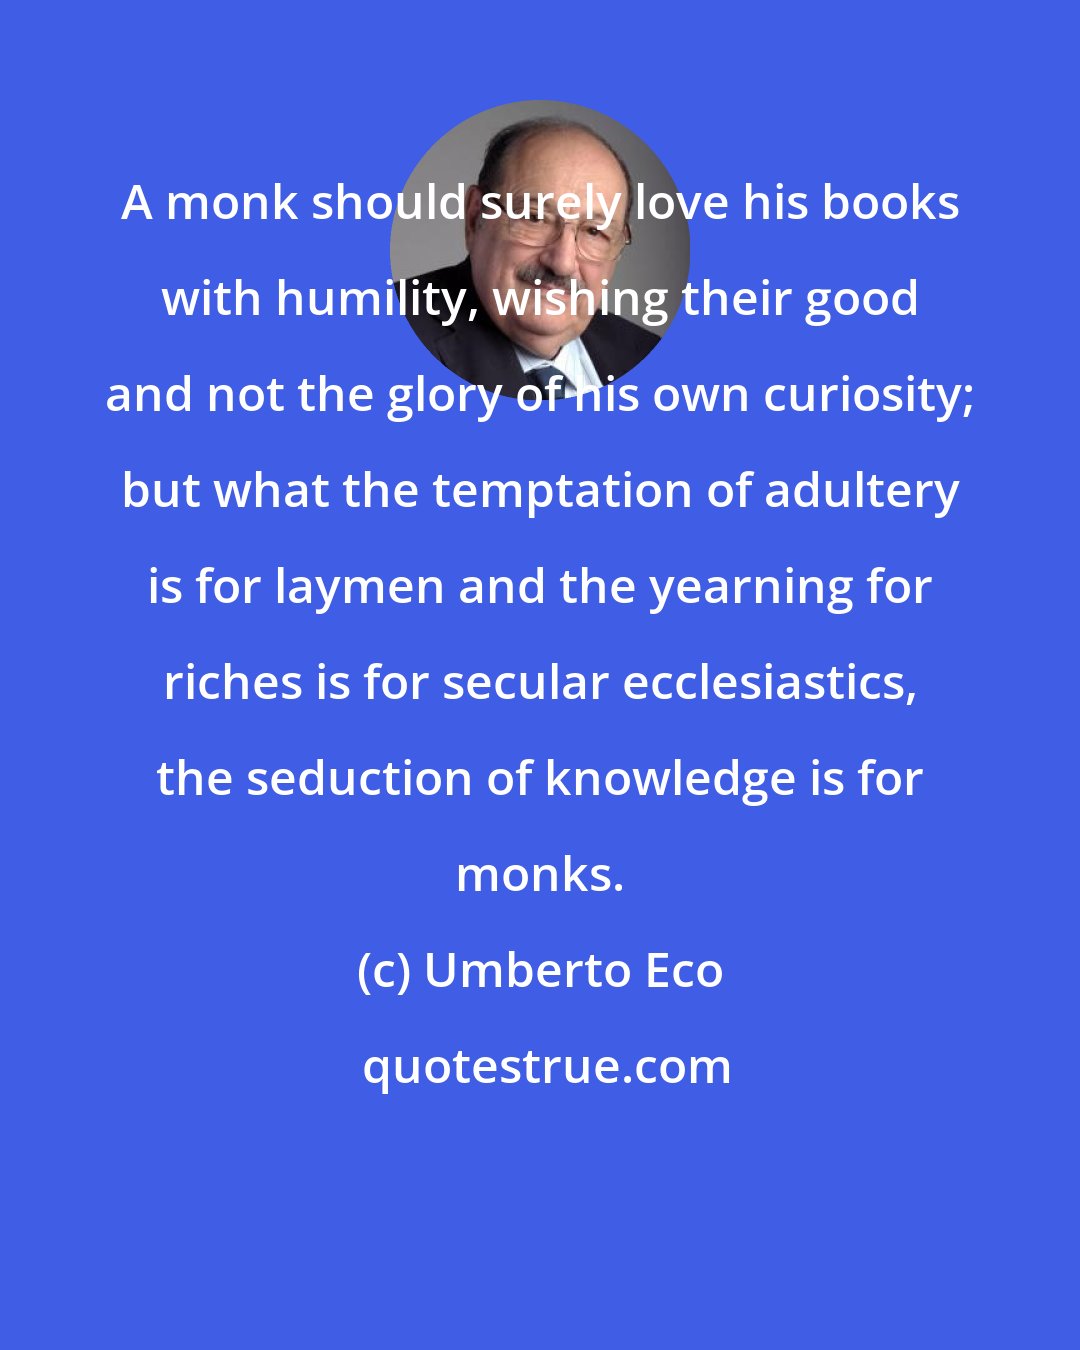 Umberto Eco: A monk should surely love his books with humility, wishing their good and not the glory of his own curiosity; but what the temptation of adultery is for laymen and the yearning for riches is for secular ecclesiastics, the seduction of knowledge is for monks.